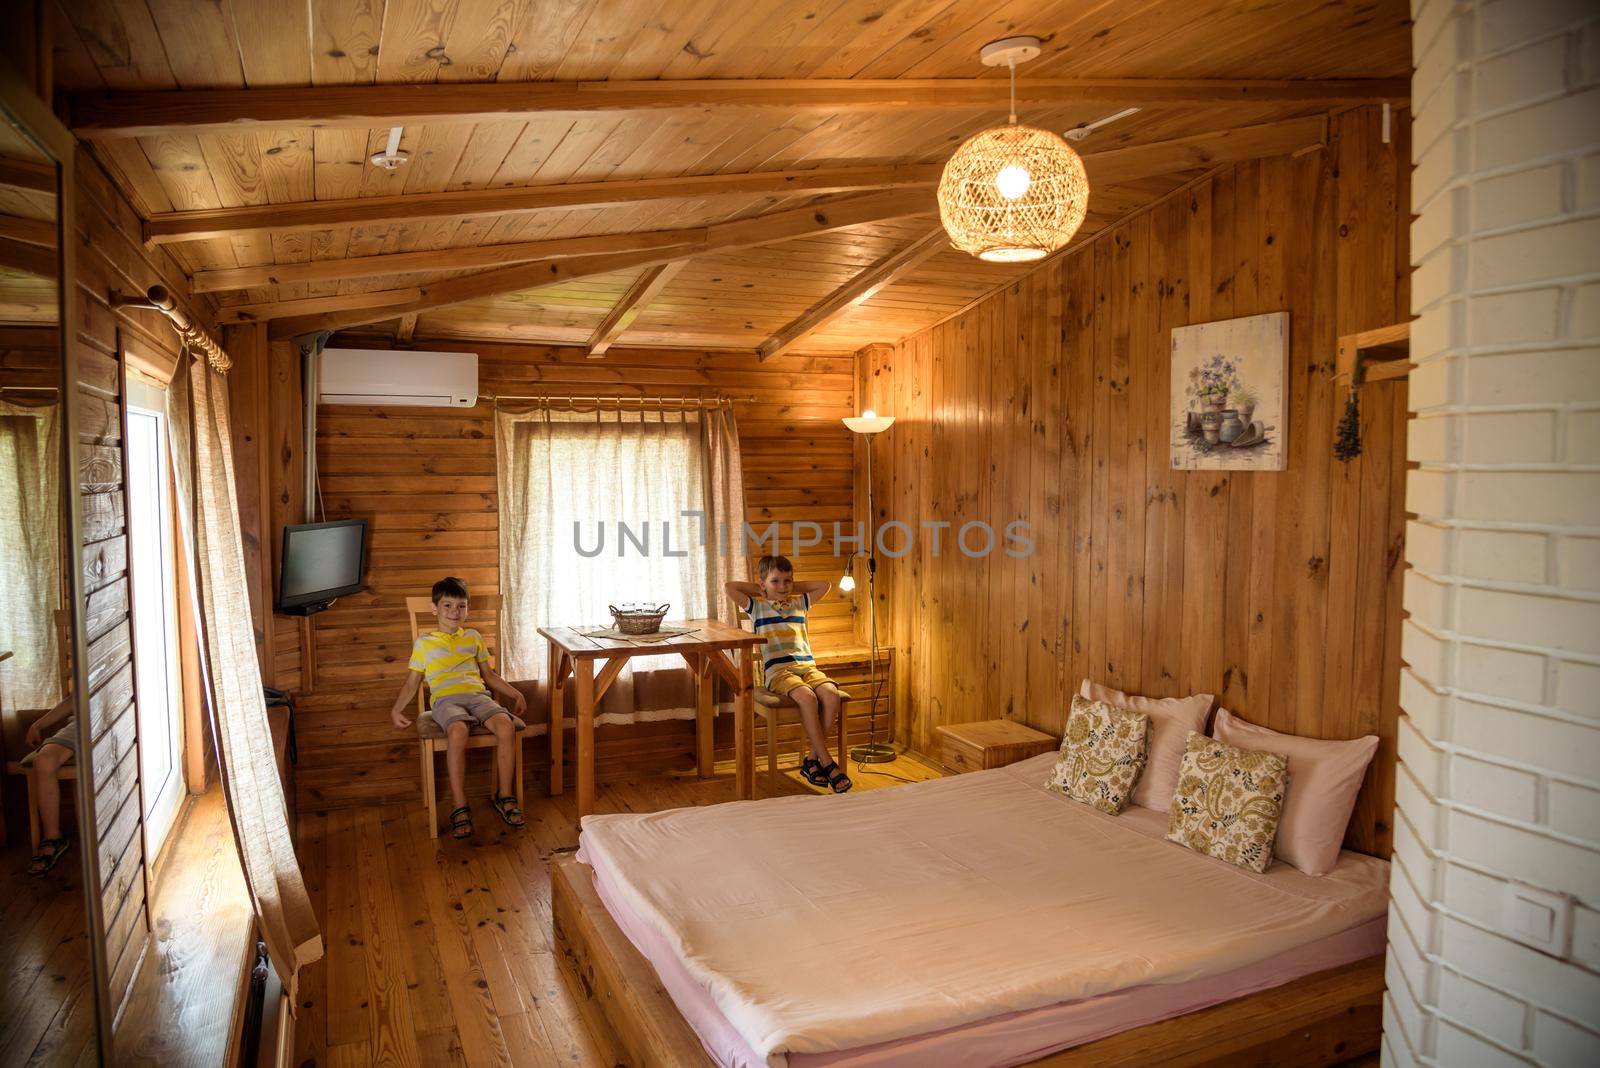 Two boys children in wooden living room in house with contemporary interior design, comfortable bad, carpet on floor, lamplight lamp, decor on table and wooden panel on copy space background.